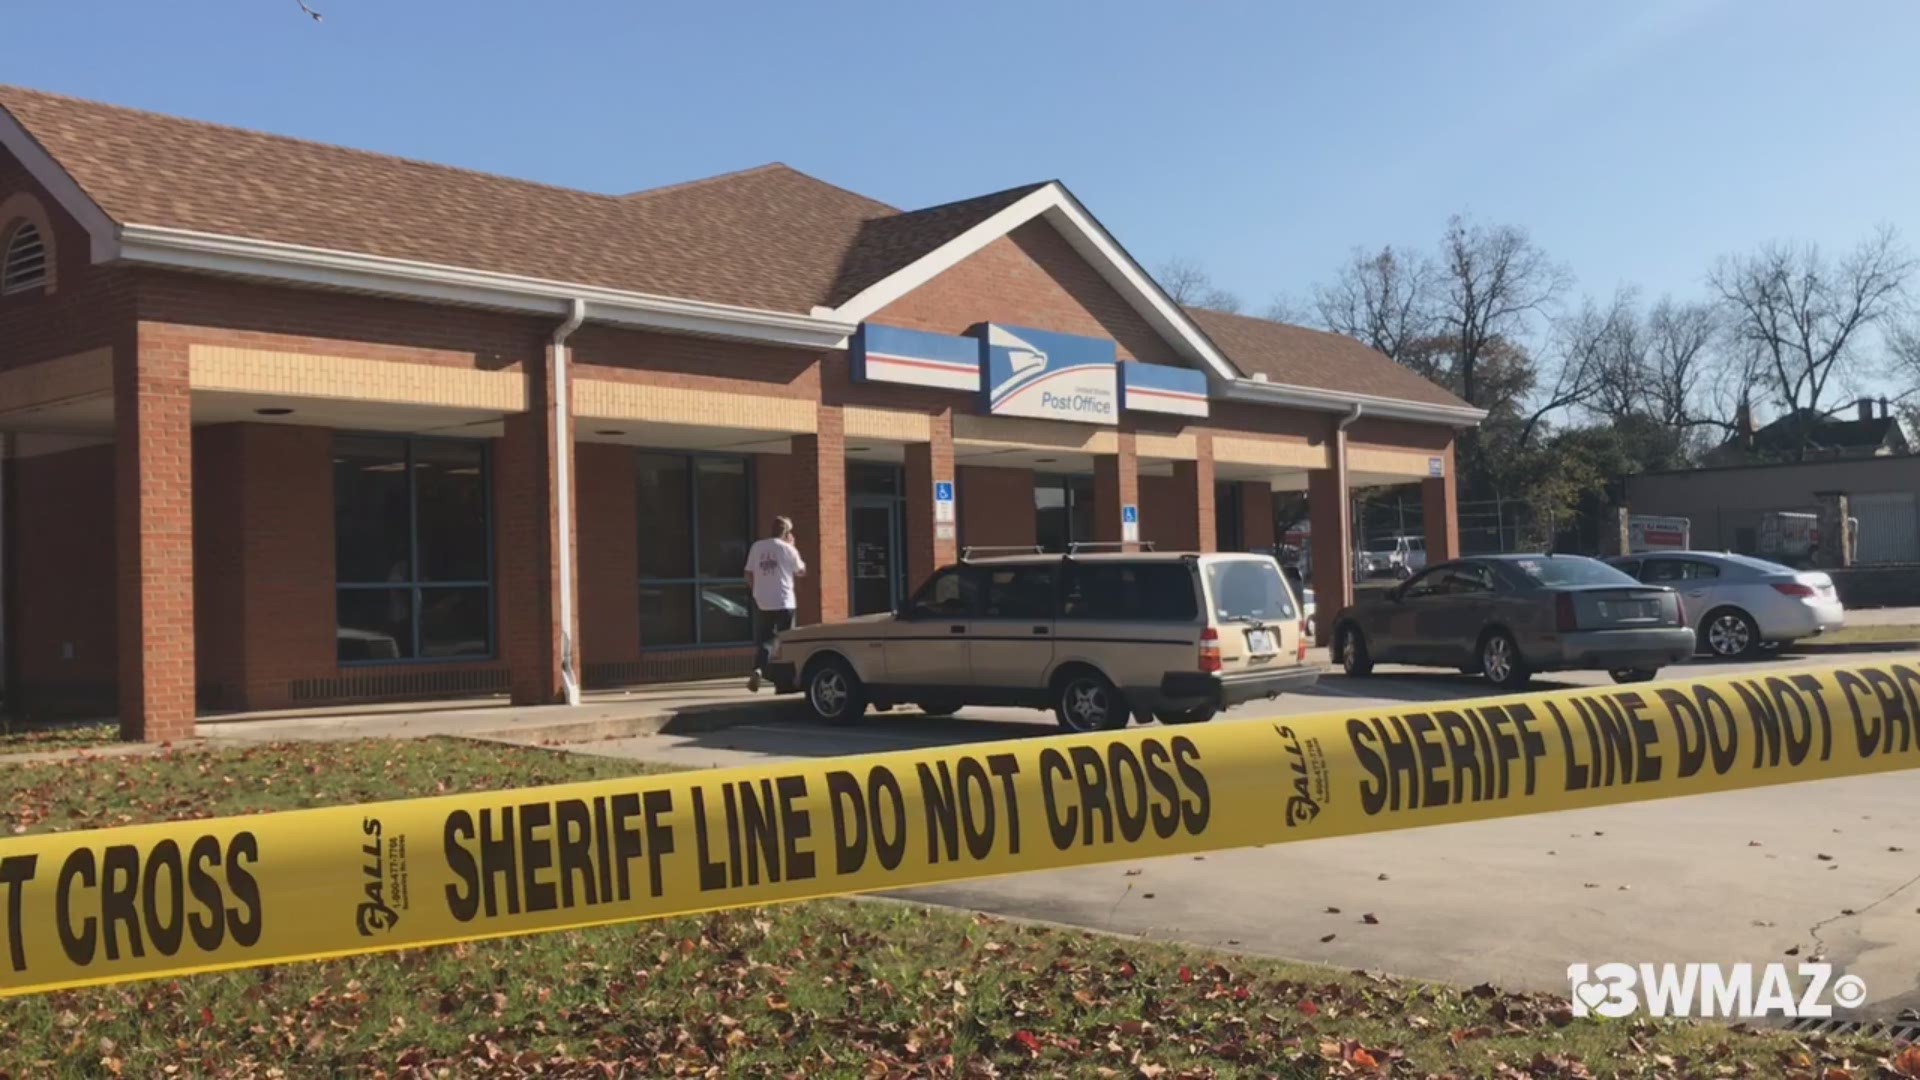 The Bibb County Sheriff's Office is investigating an armed robbery at the post office on Pio Nono.